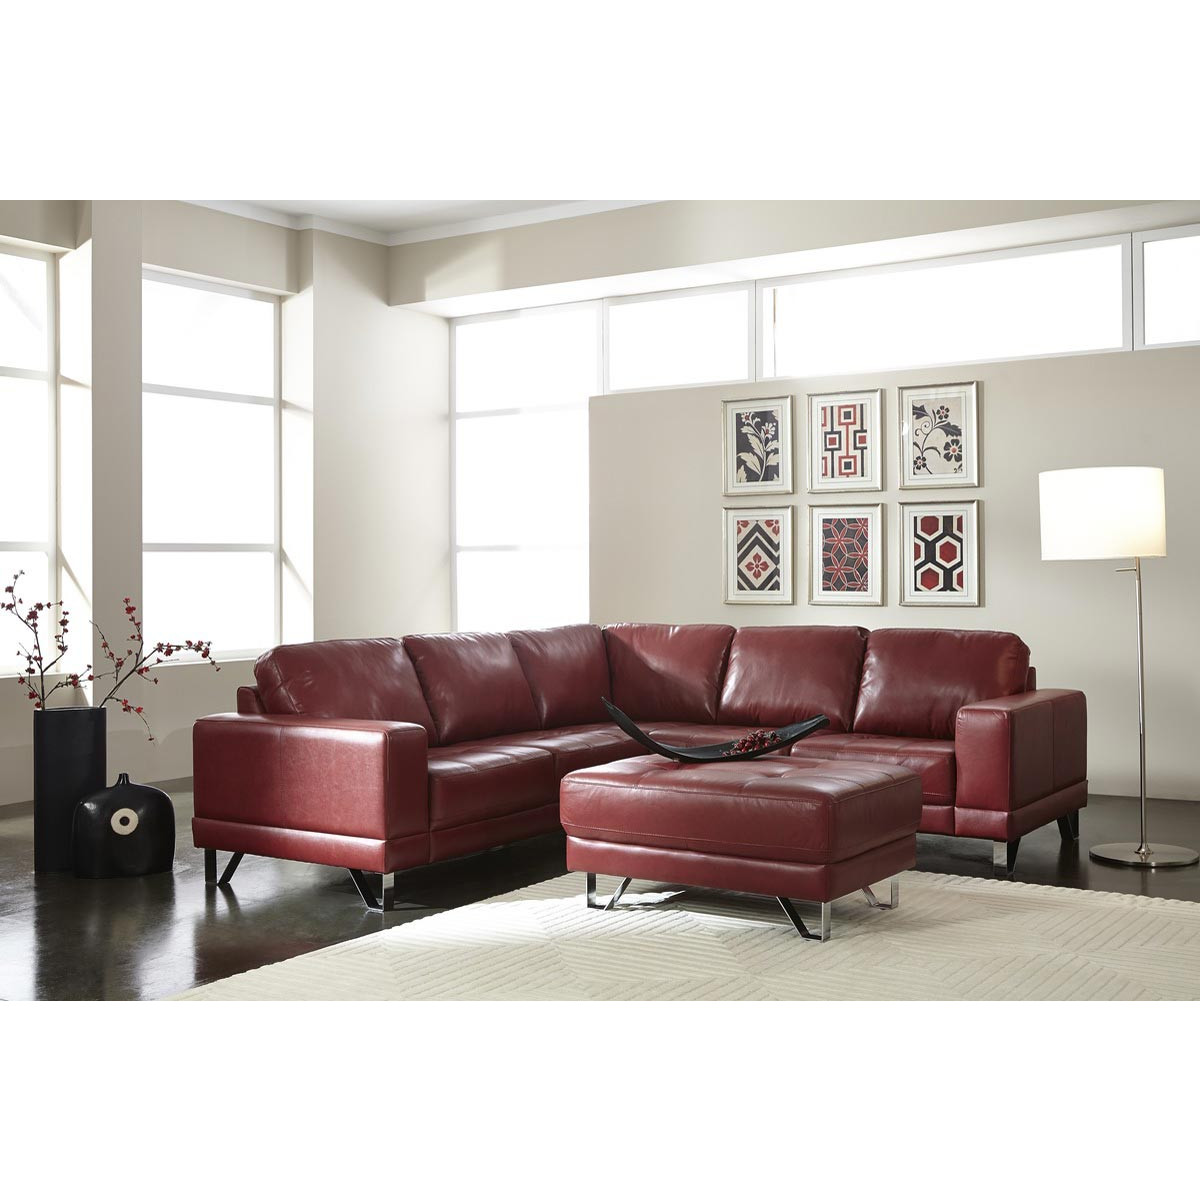 Palliser Seattle Sectional From 1 768, Leather Couch Seattle